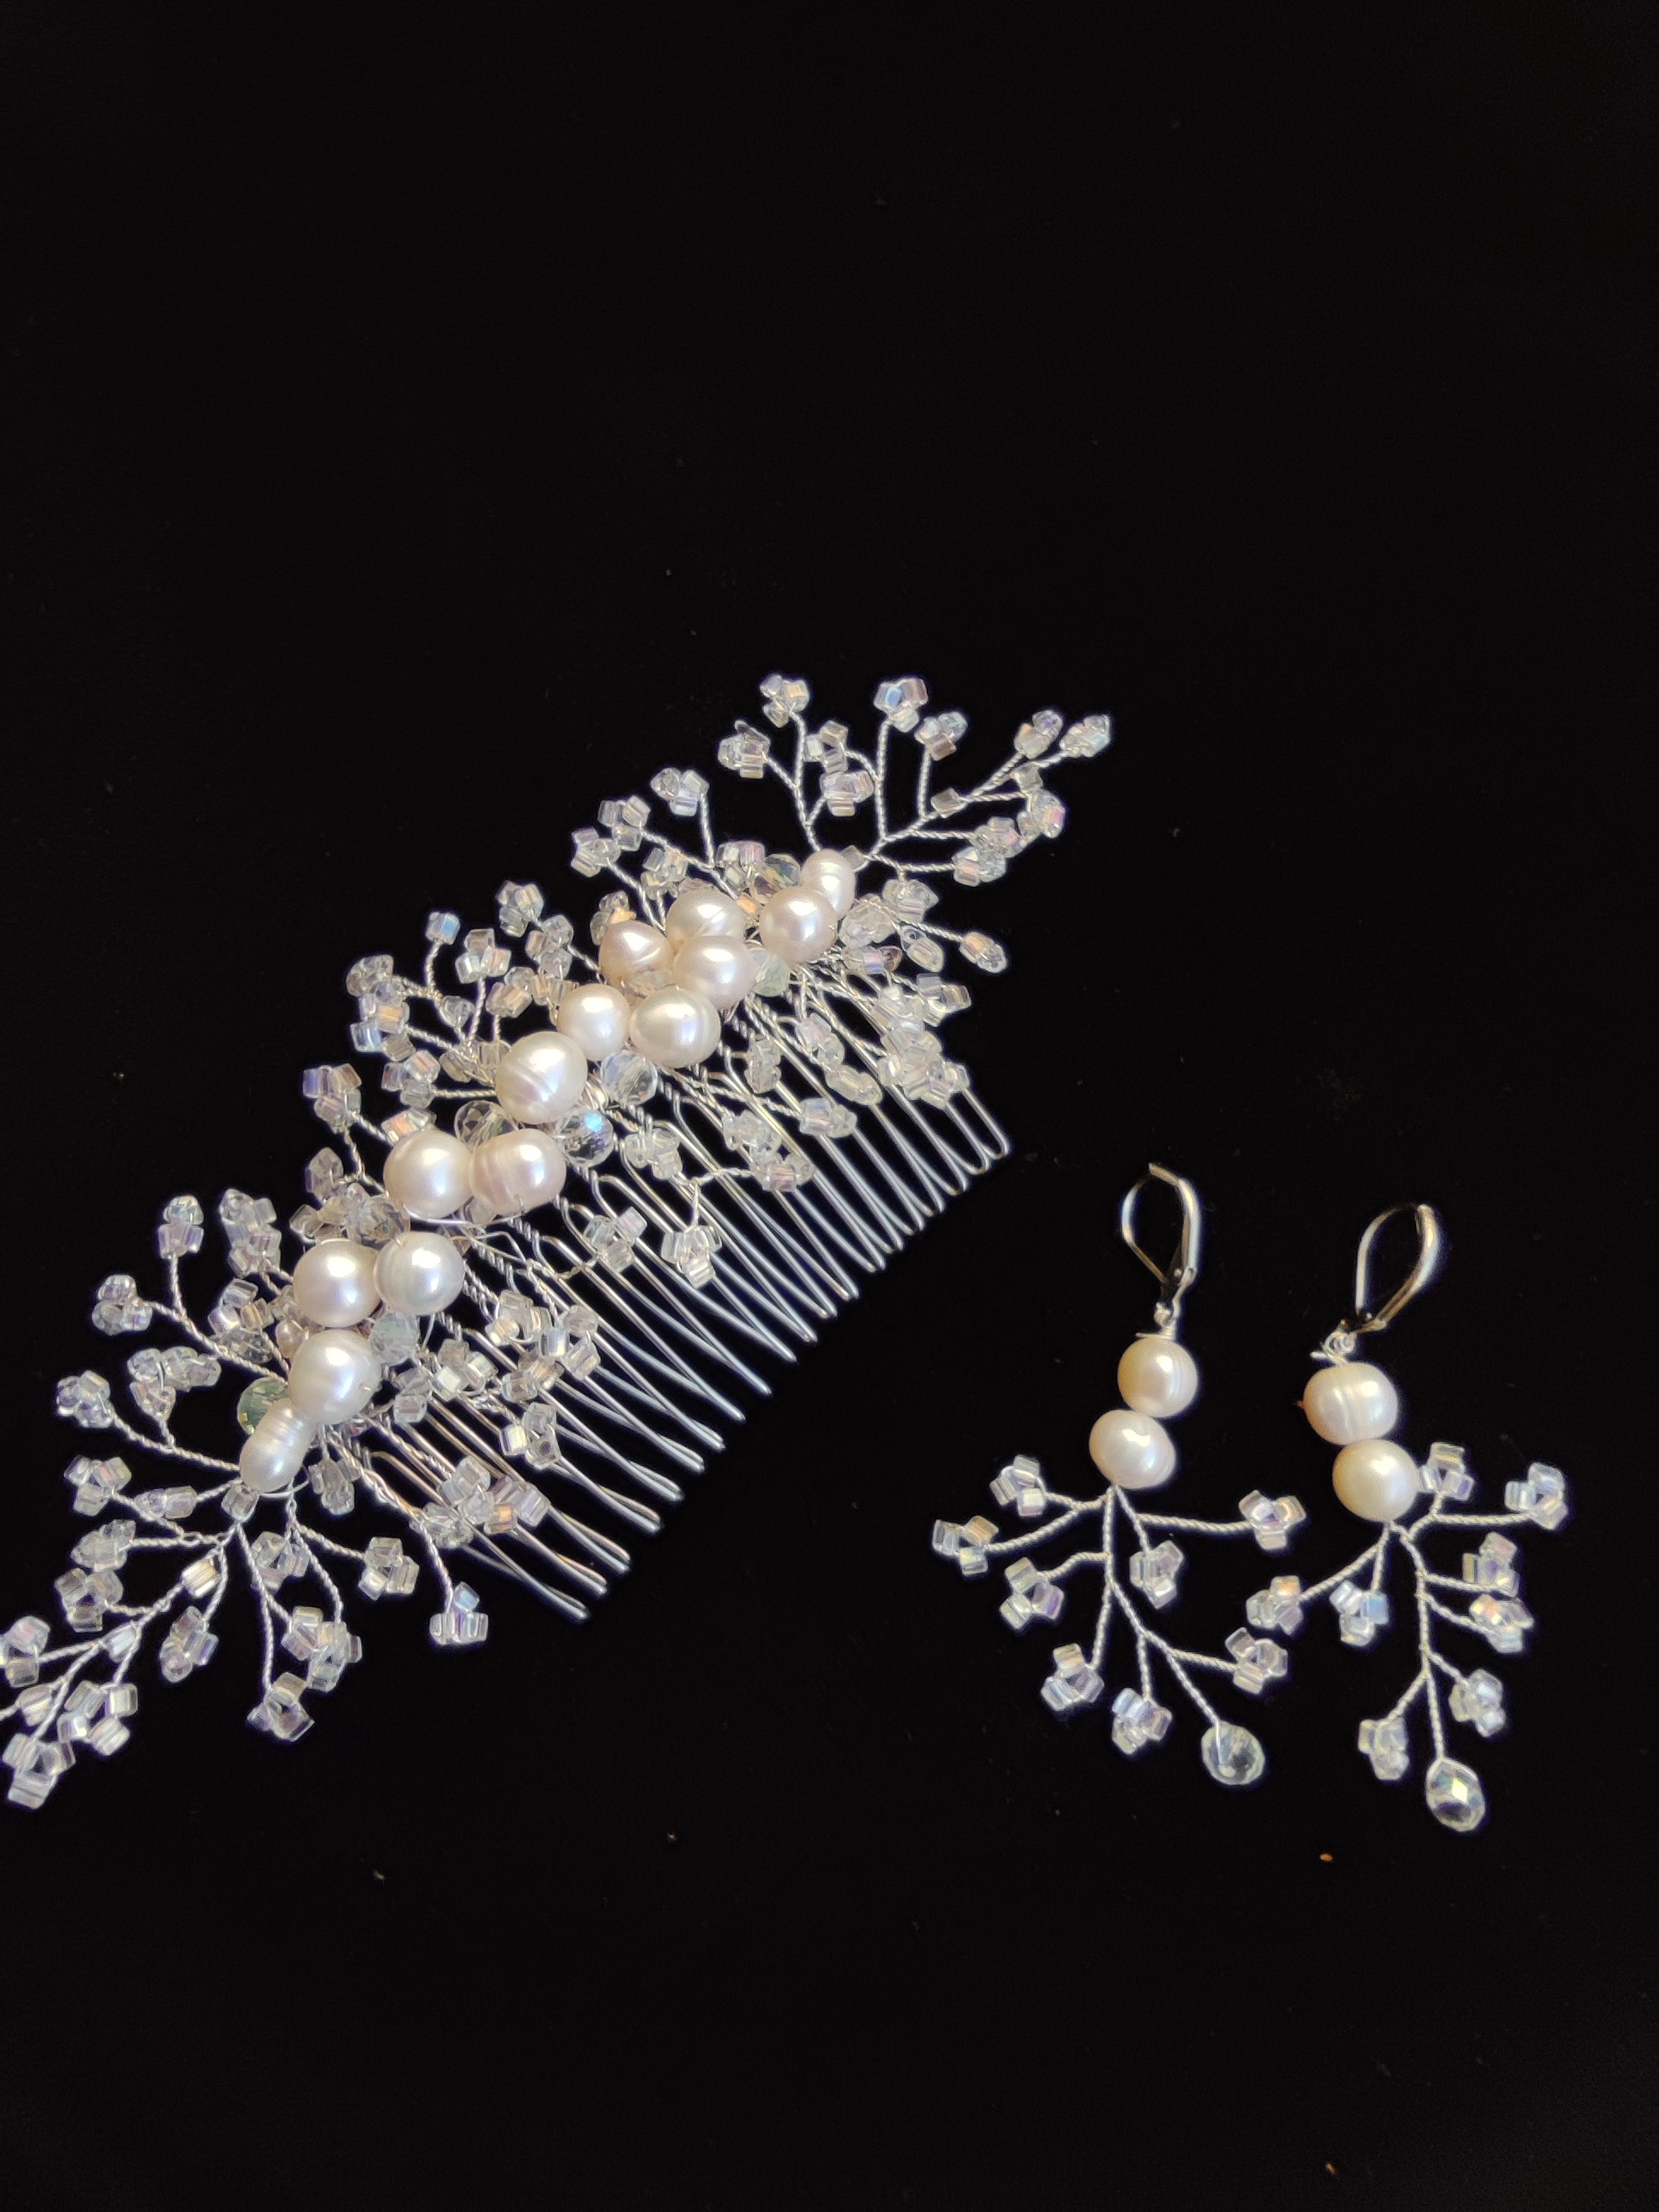 Wedding Hair Comb - Headpiece with Natural Pearls Crystals and Beads - Beaded Fairytale